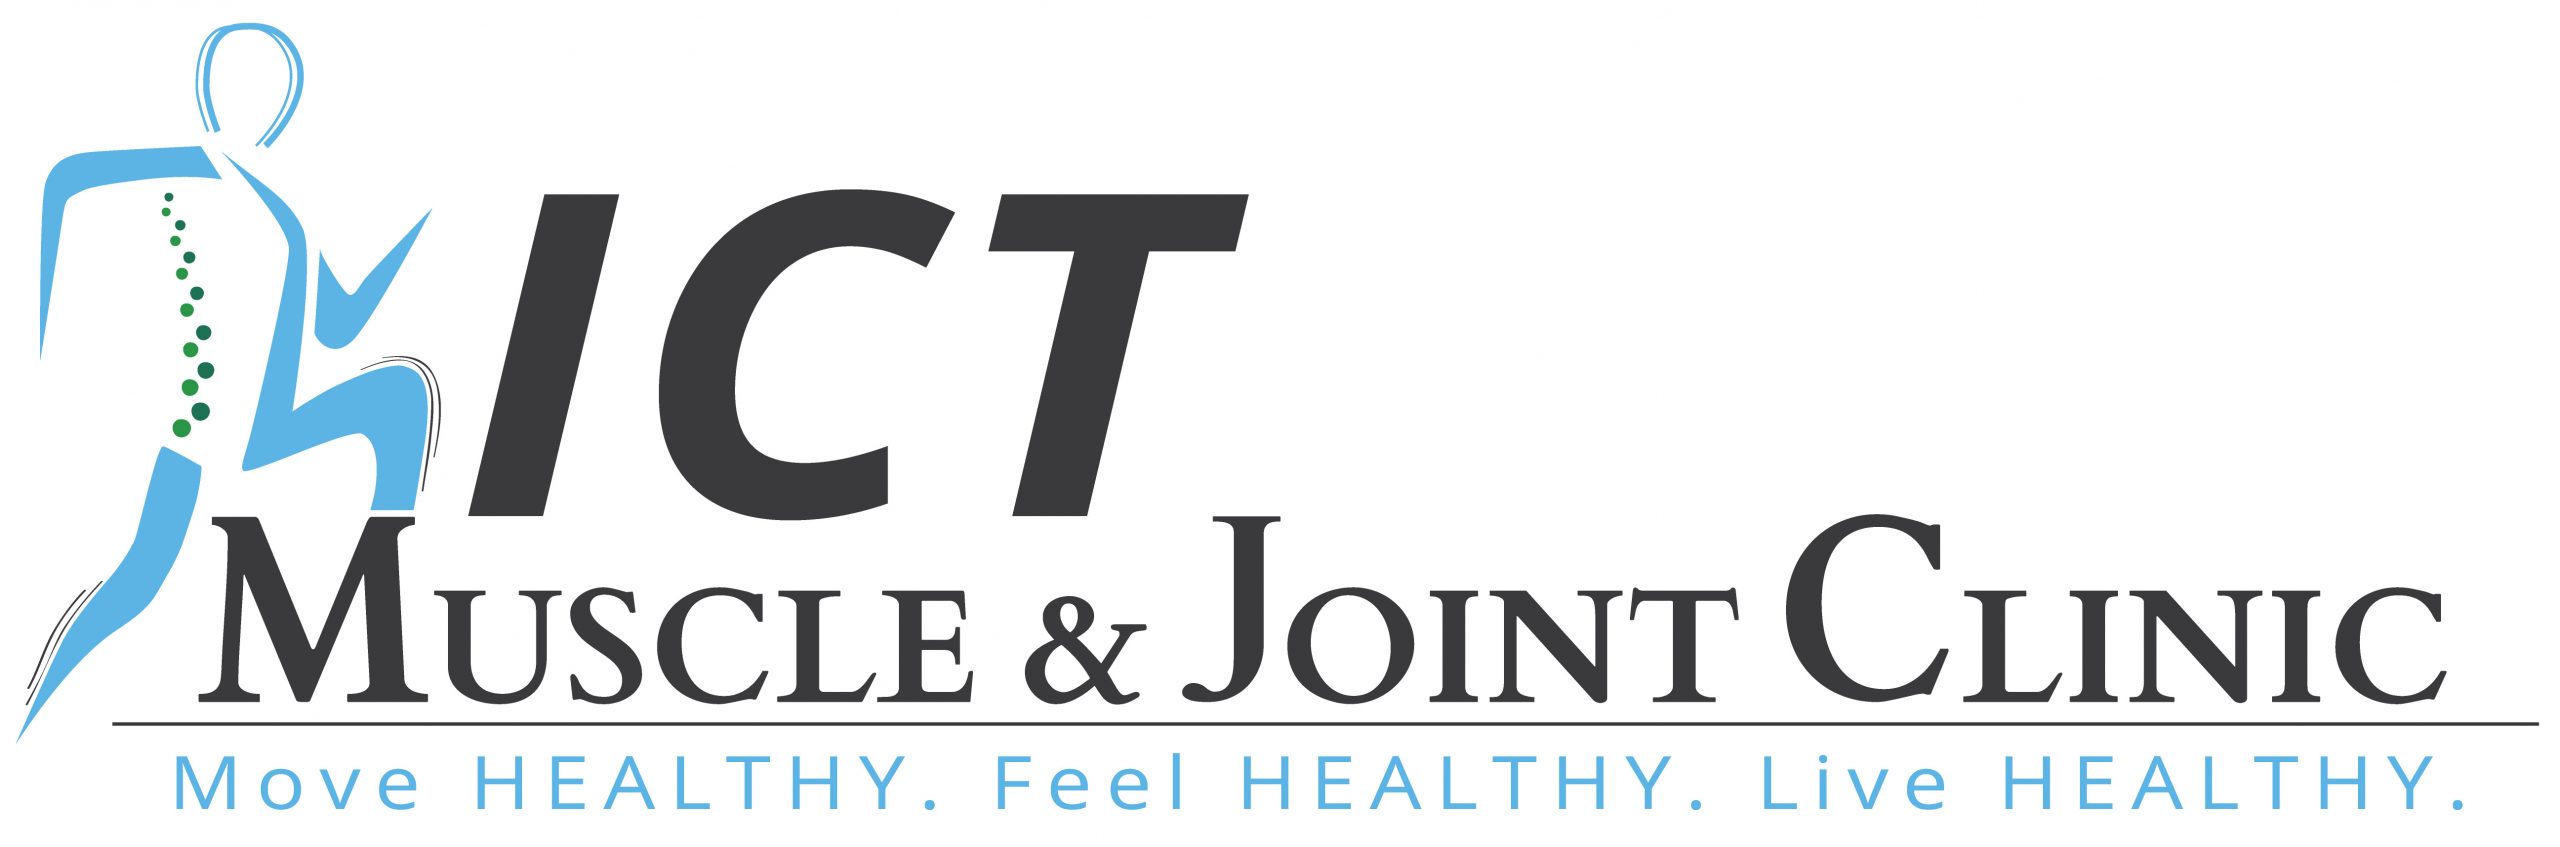 ict-muscle-and-joint-clinic-logo